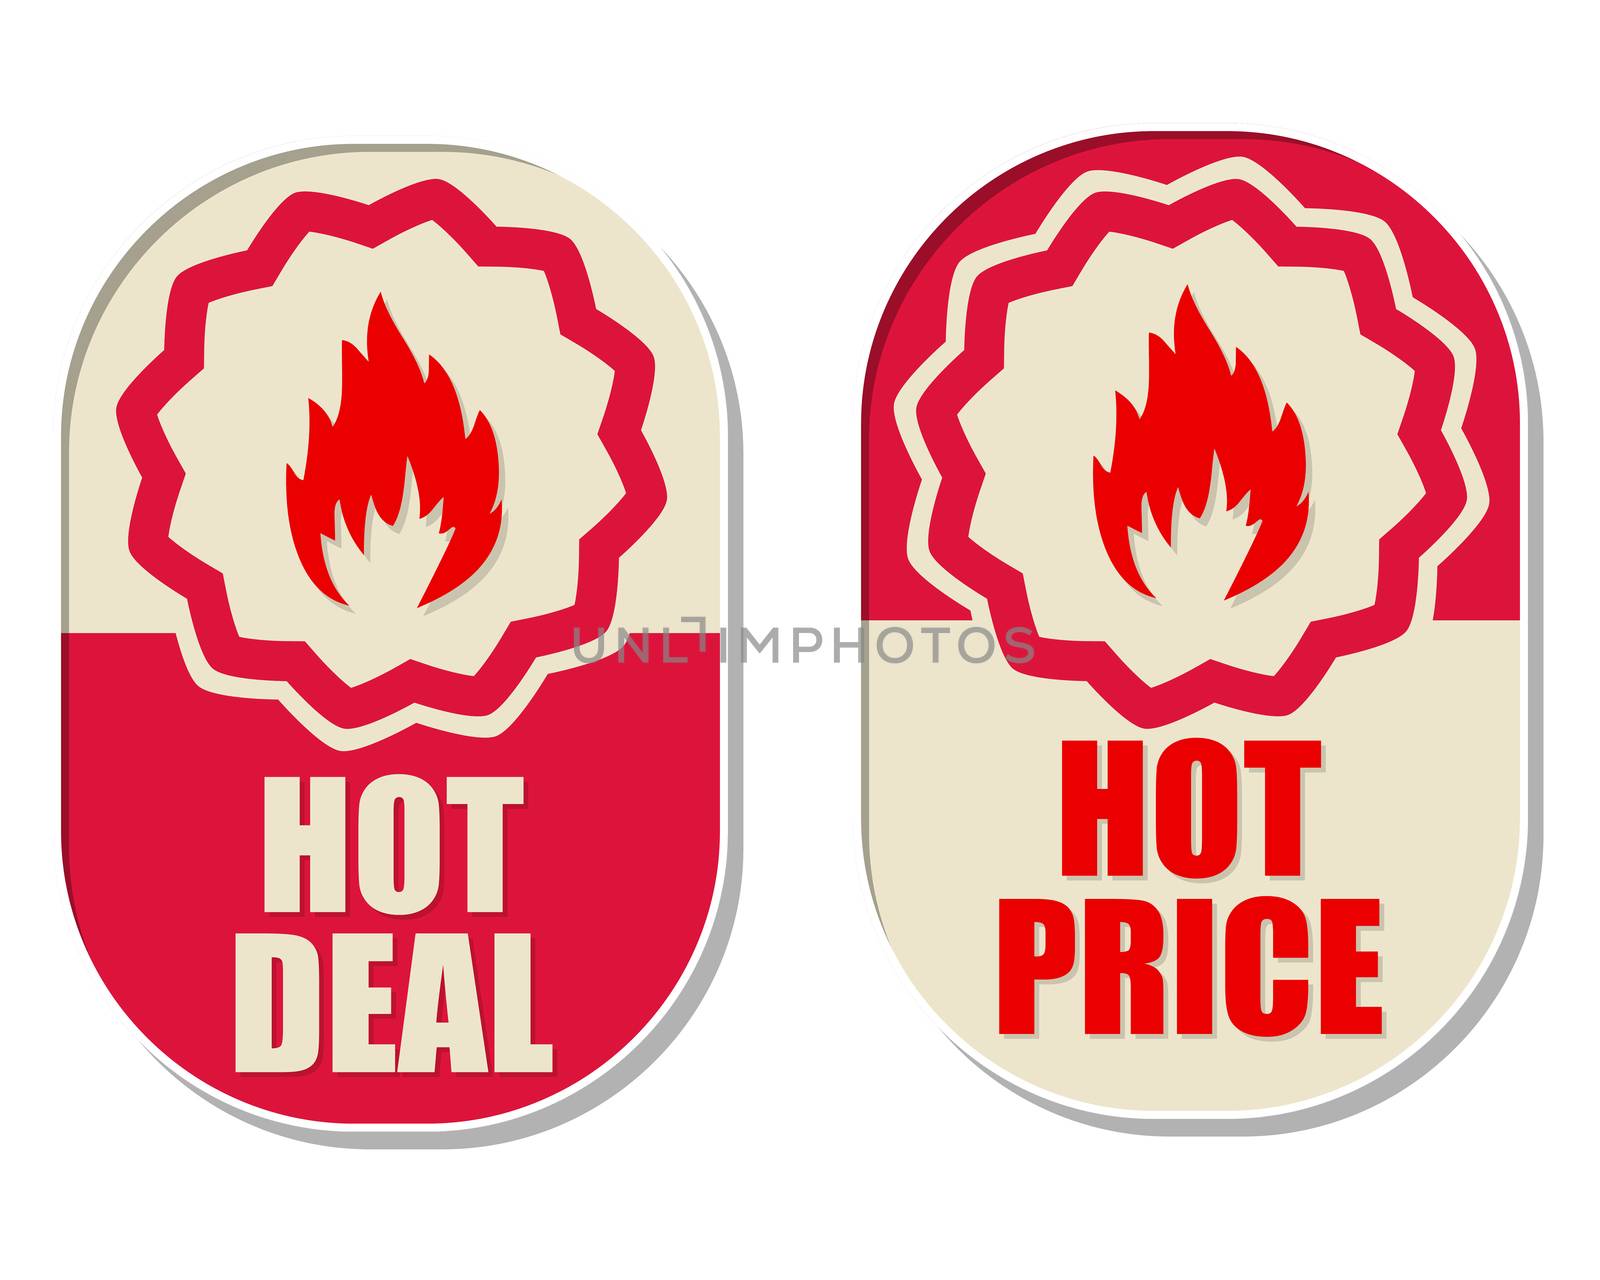 hot deal and hot price text banners with flames signs, two elliptic flat design labels with fire symbols, business shopping concept